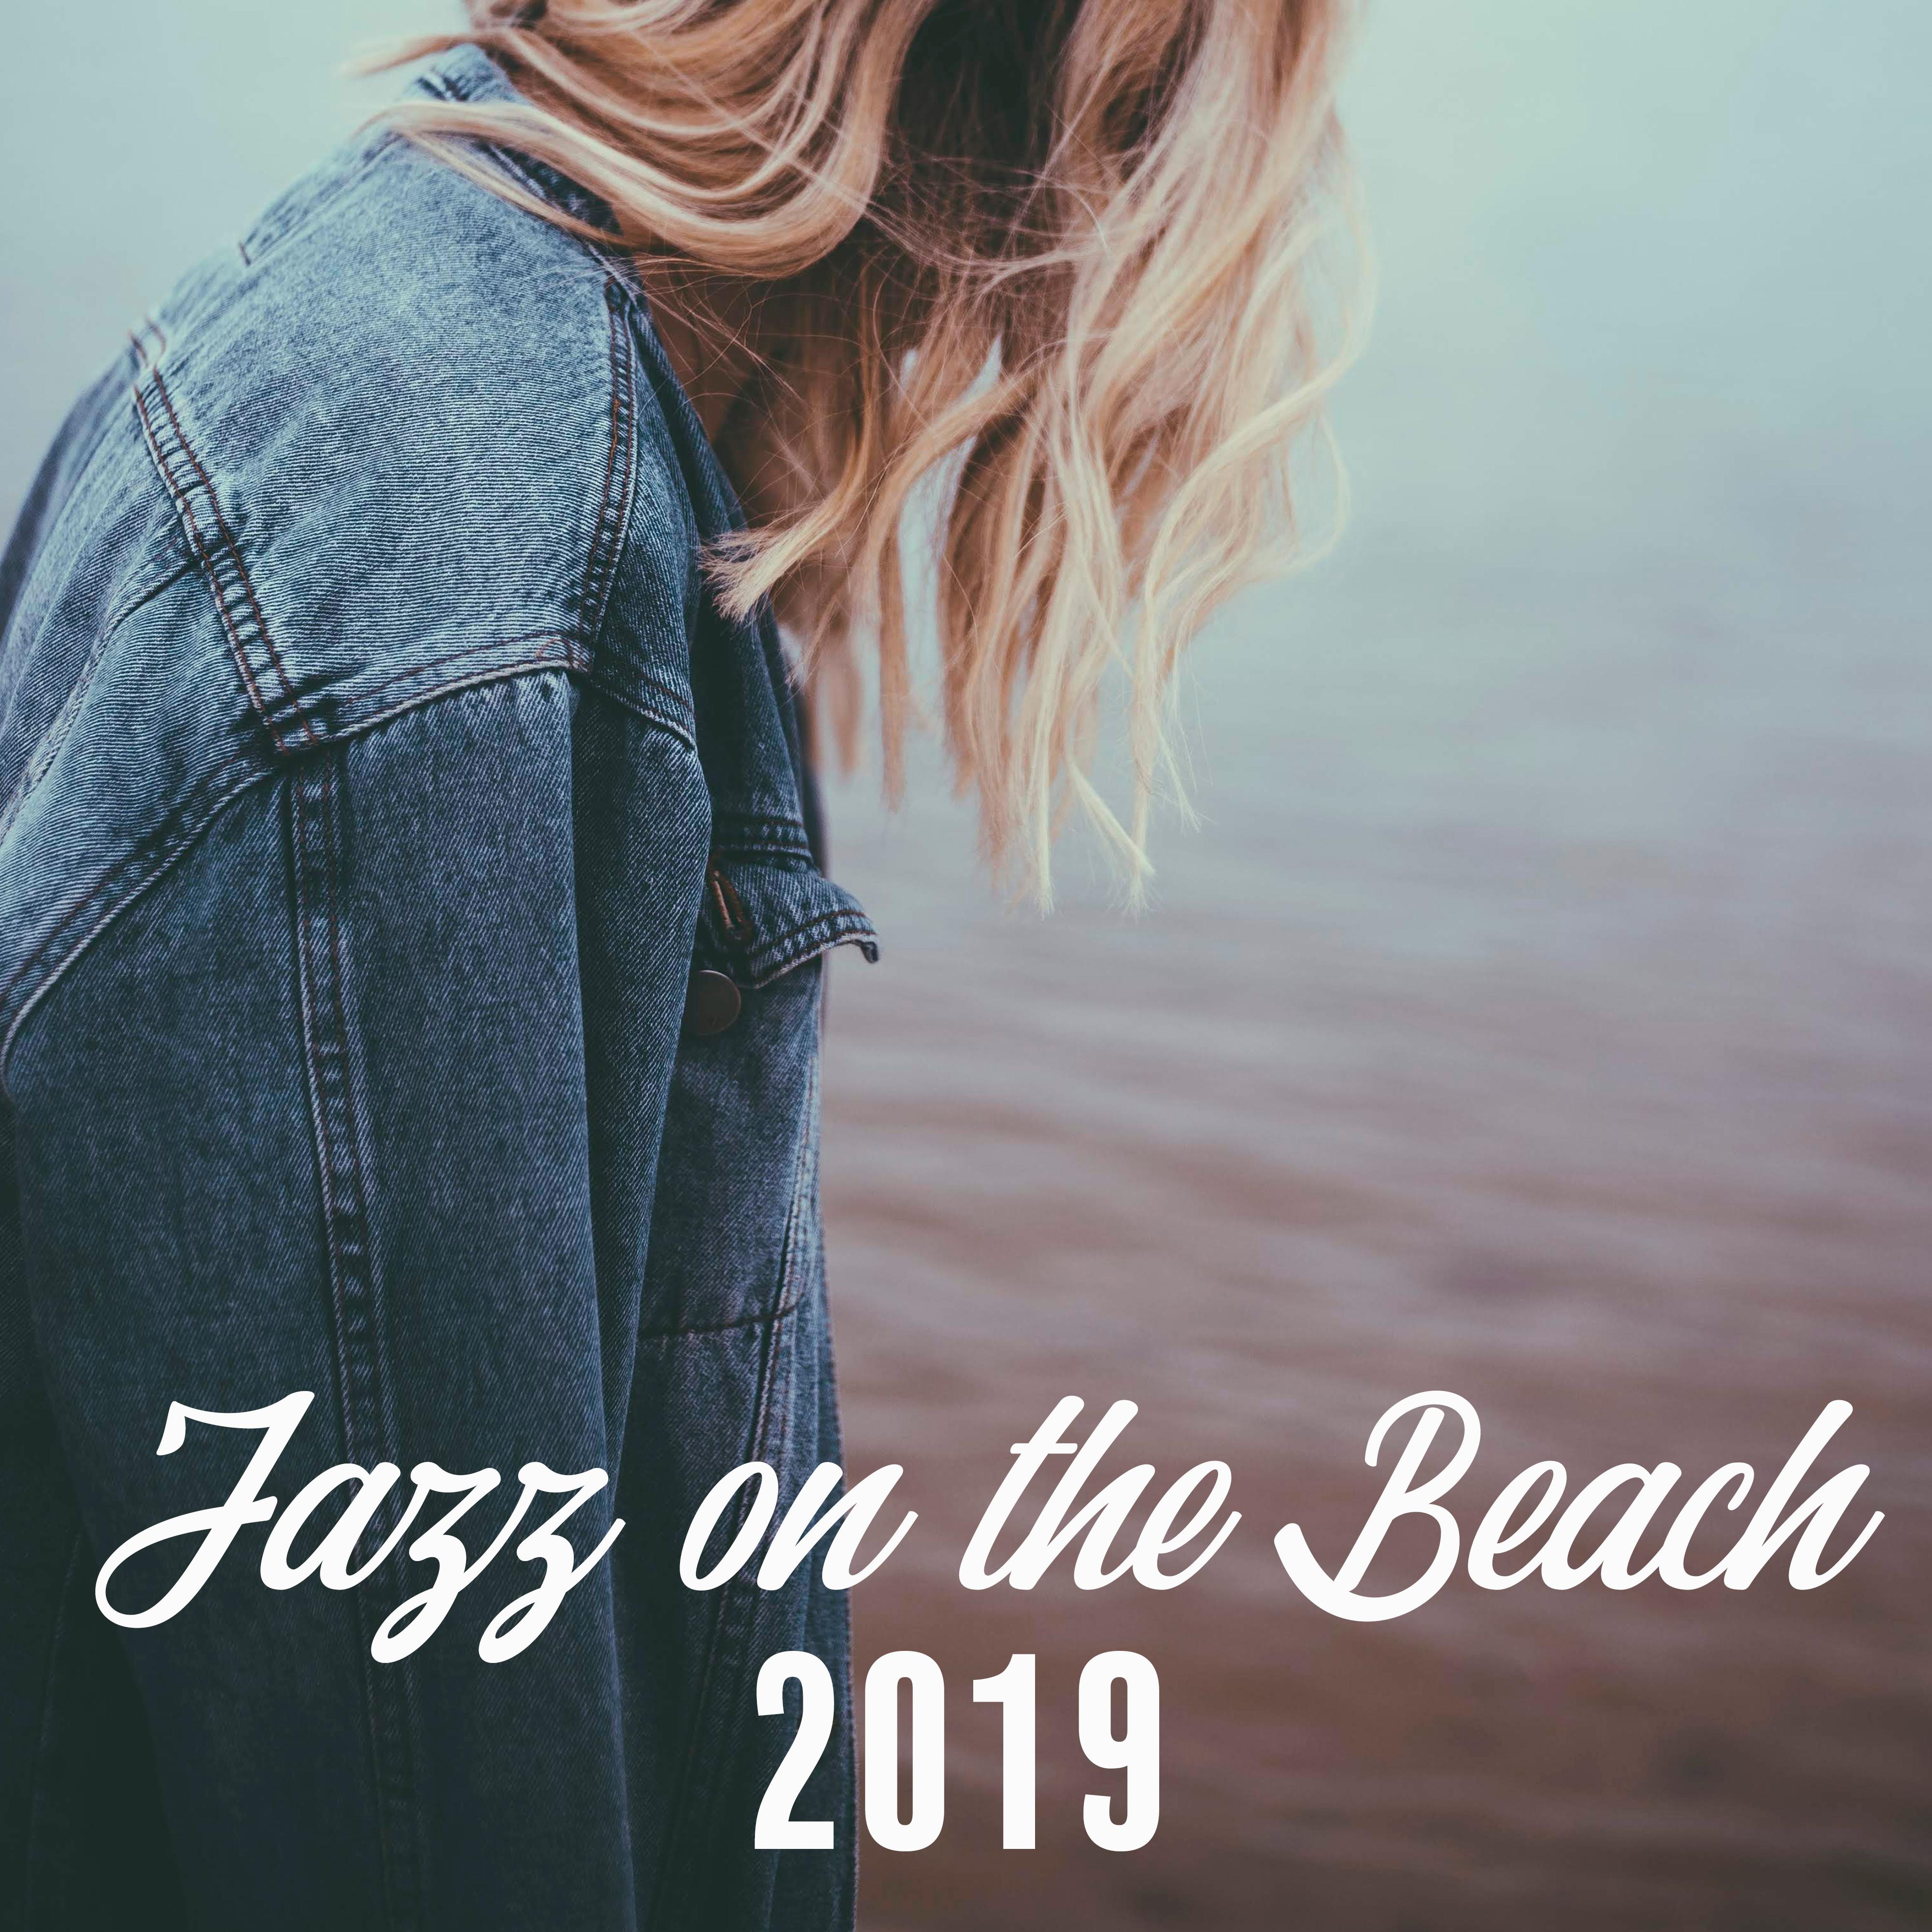 Jazz on the Beach 2019: 15 Relaxing Vintage Jazz Songs Perfect to Spend Time with Cocktails & Friends on the Beach